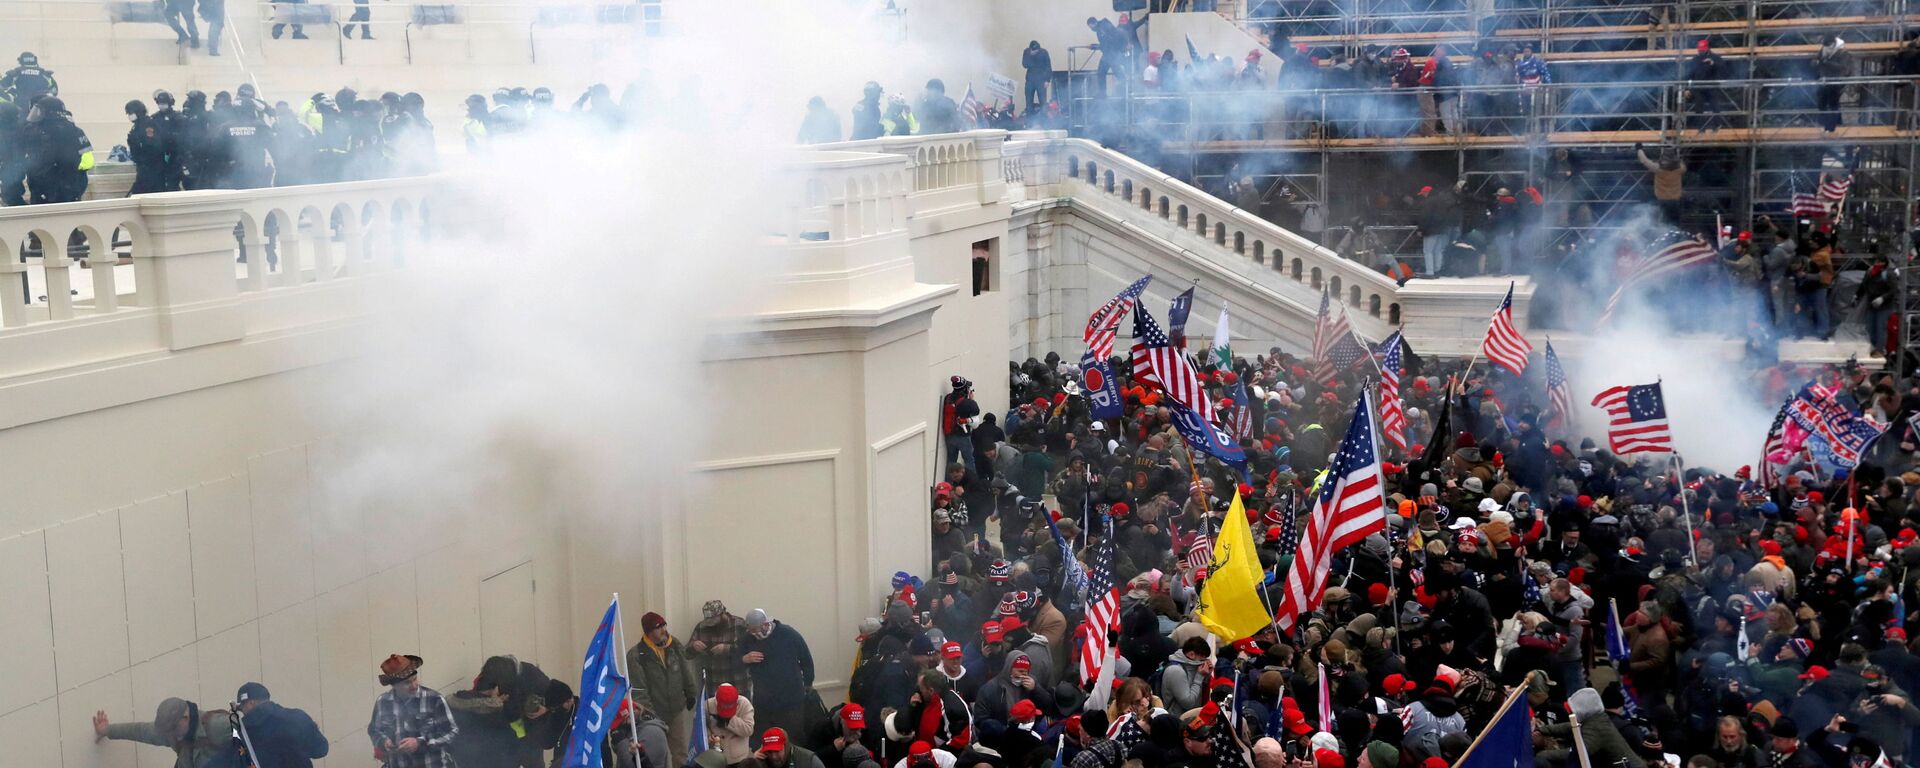 Police release tear gas into a crowd of pro-Trump protesters during clashes at a rally to contest the certification of the 2020 U.S. presidential election results by the U.S. Congress, at the U.S. Capitol Building in Washington, U.S, January 6, 2021. - Sputnik International, 1920, 23.09.2021